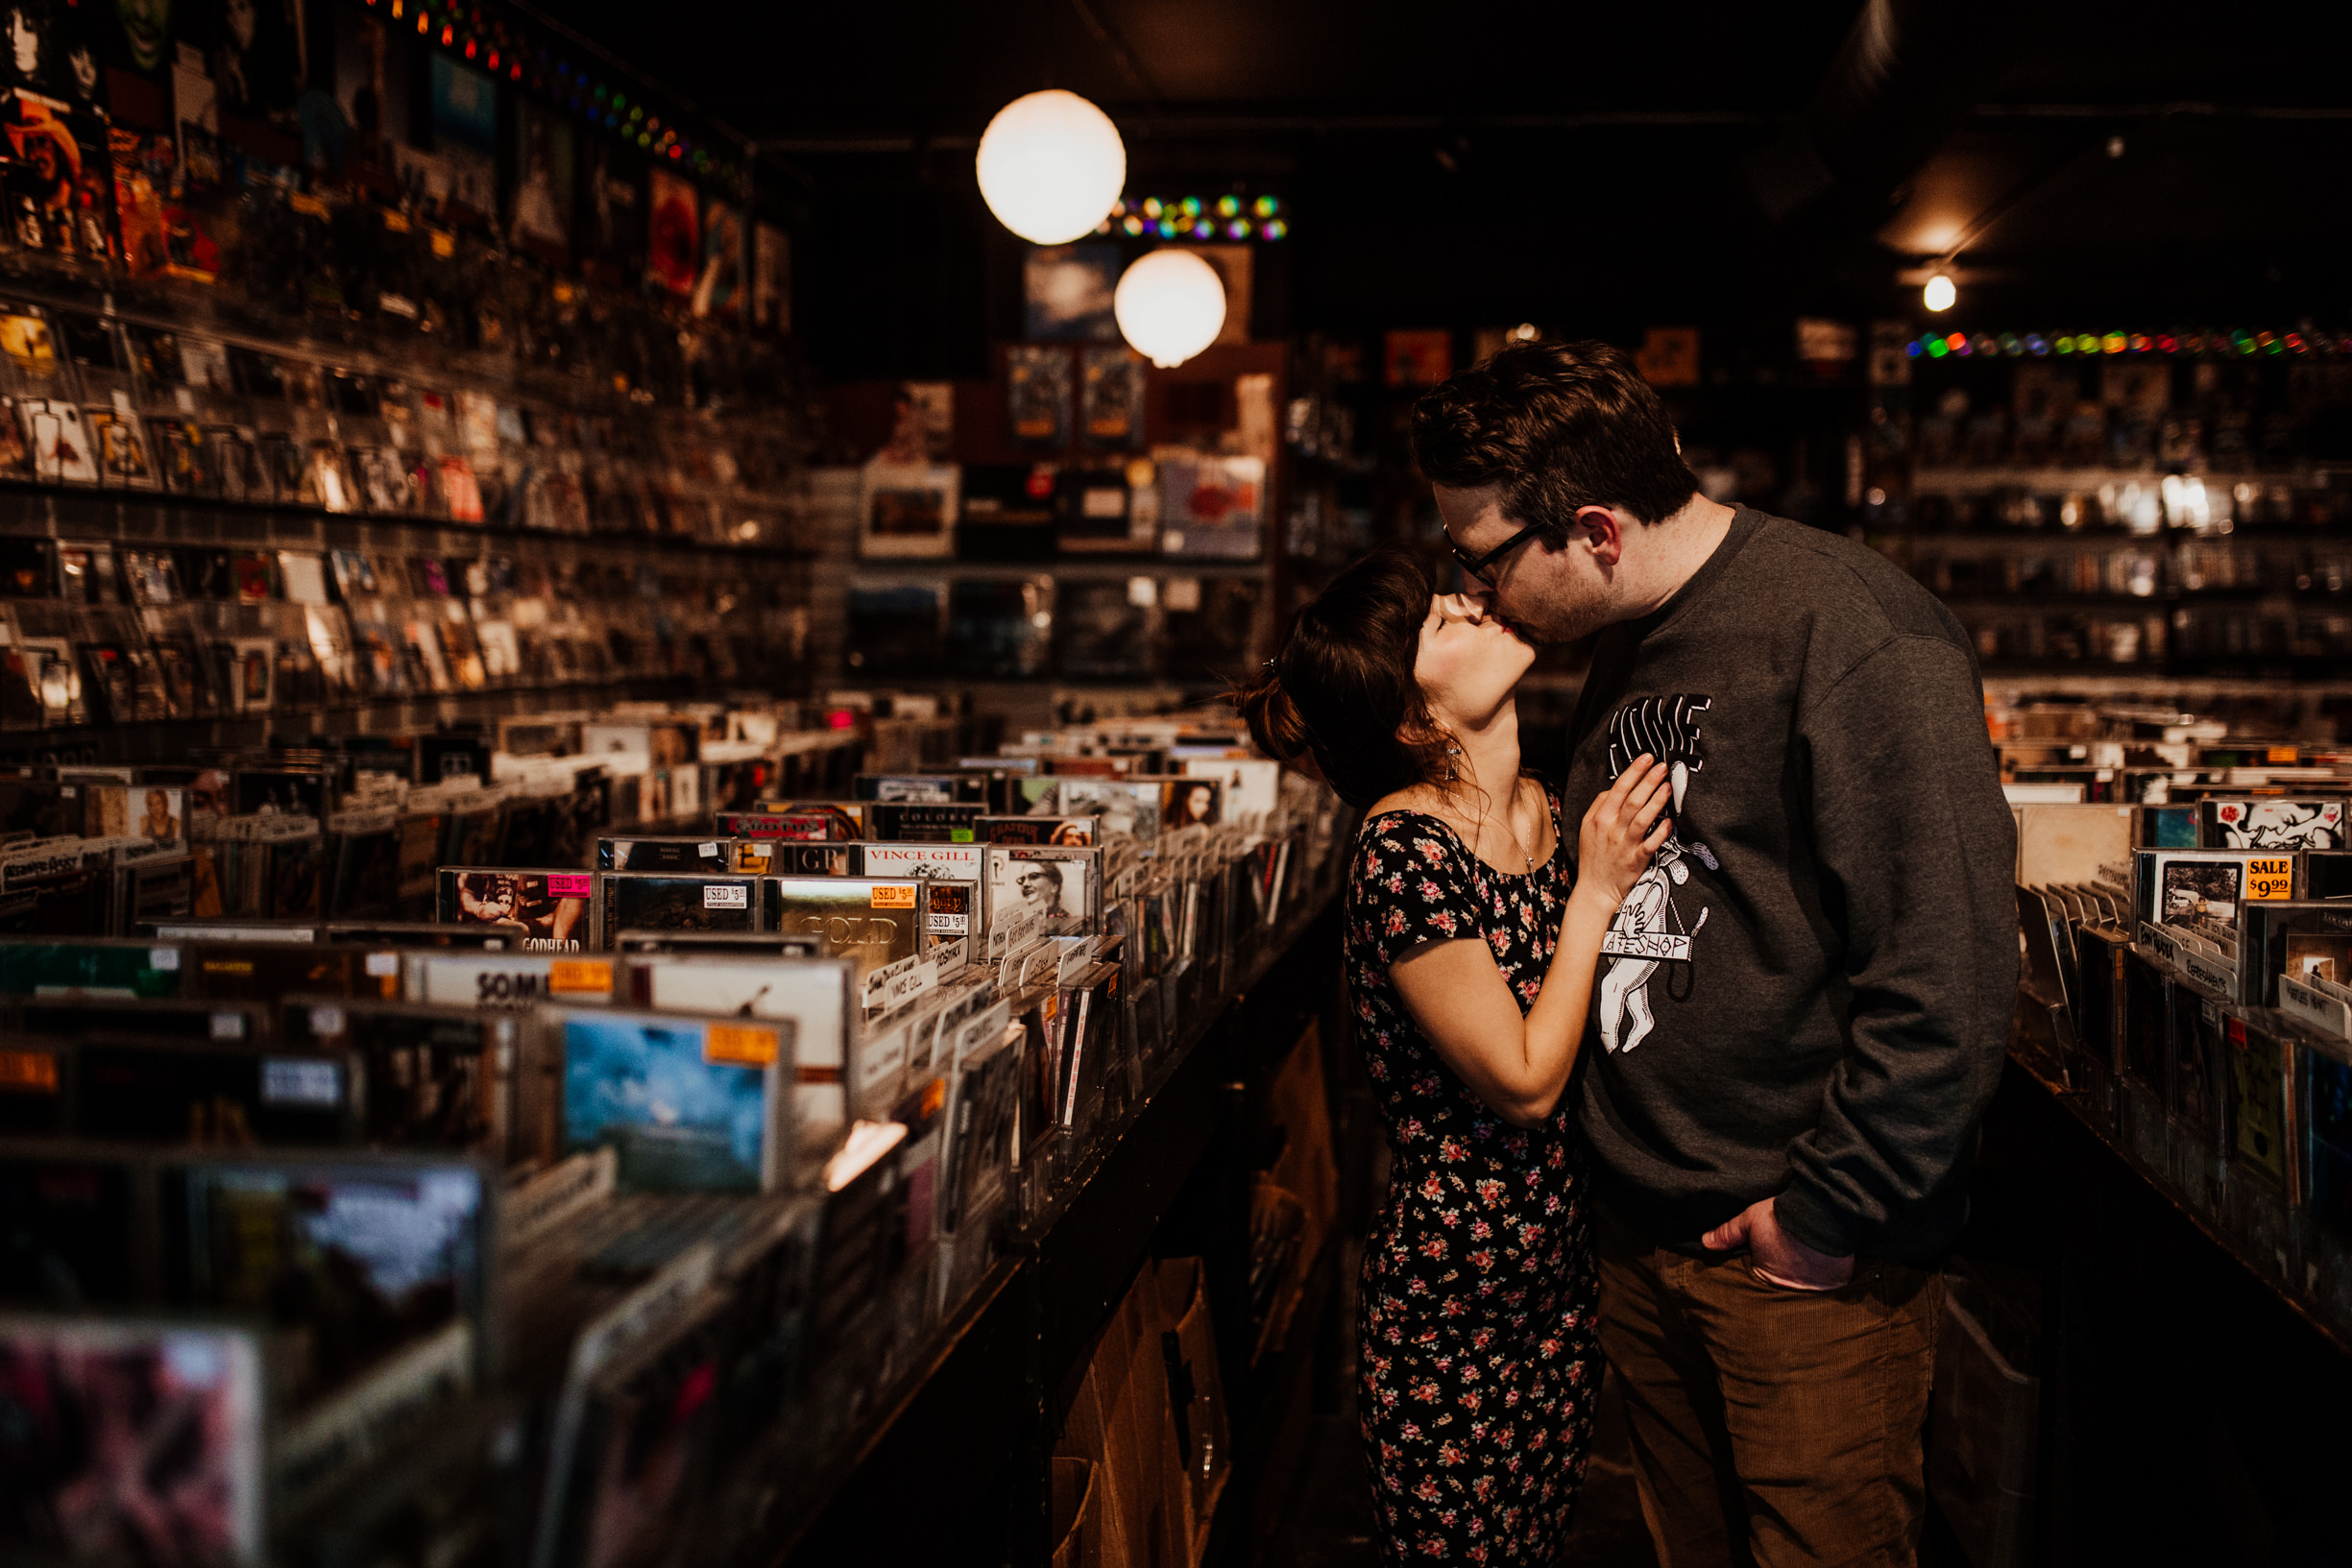 louisville-engagement-photographer-record-store-in-home-session-crystal-ludwick-photo (36 of 53).jpg